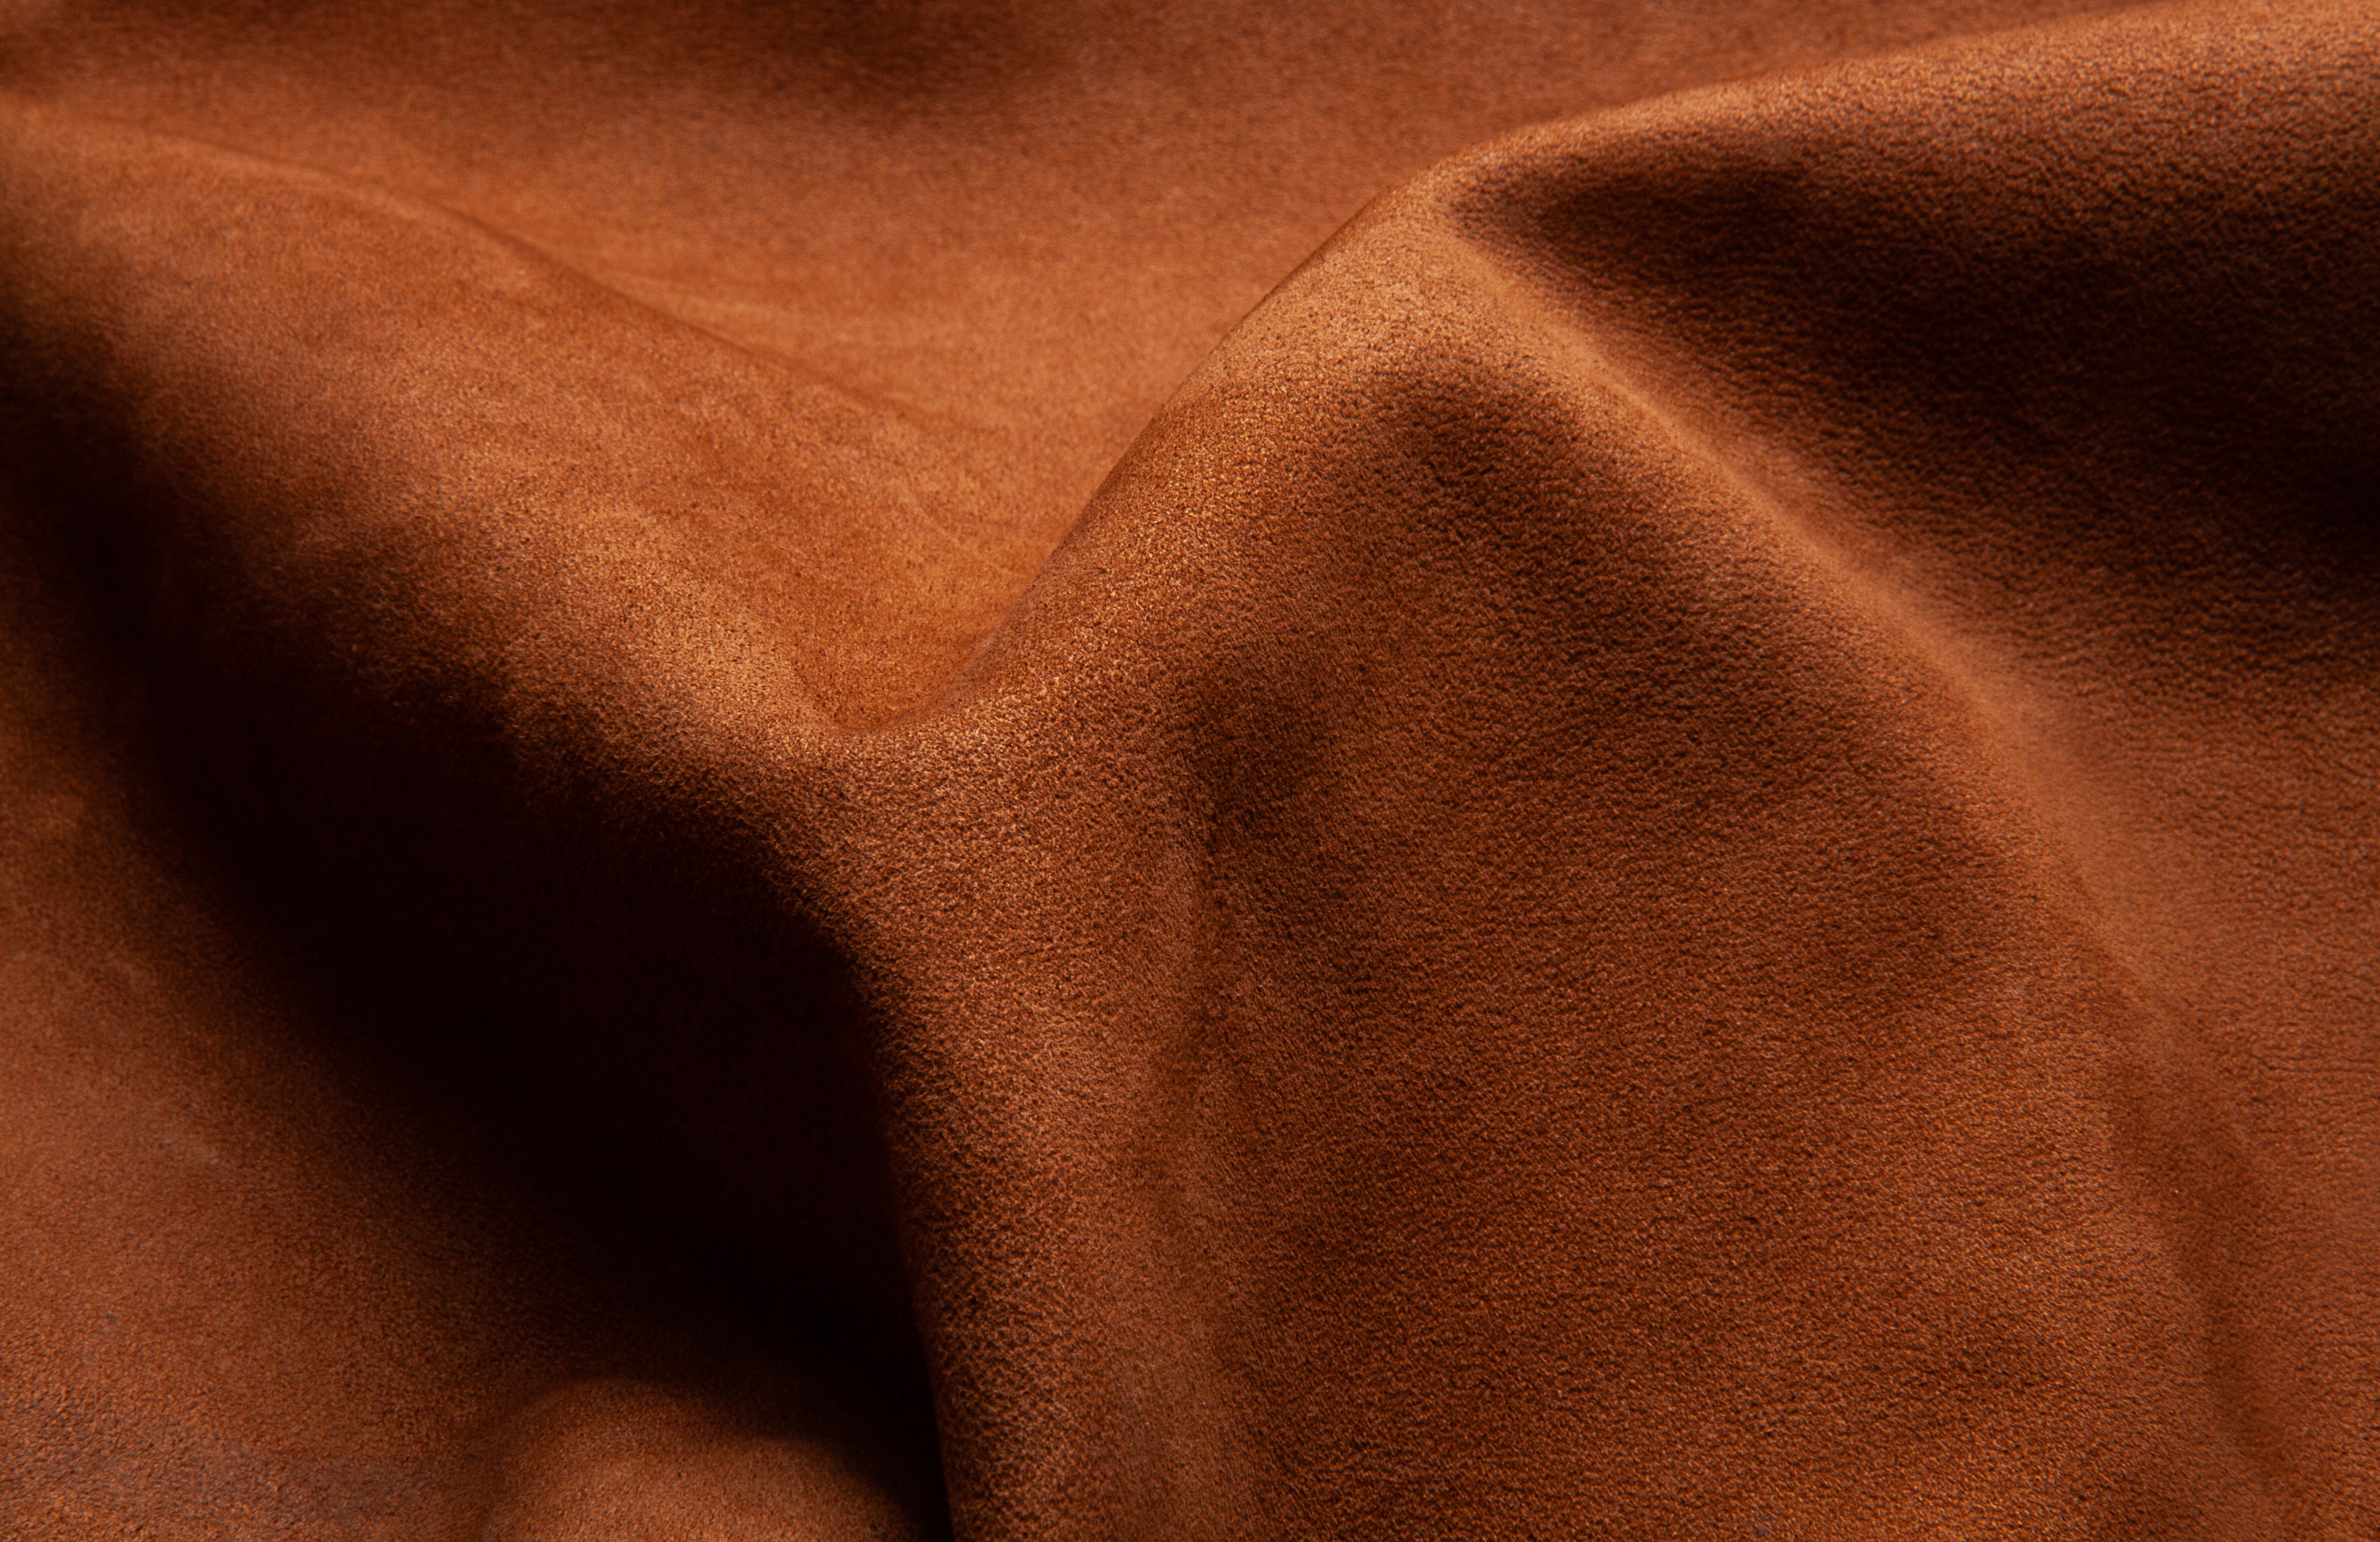 texture, textures, brown, folds, pleating, leather, skin FHD, 4K, UHD